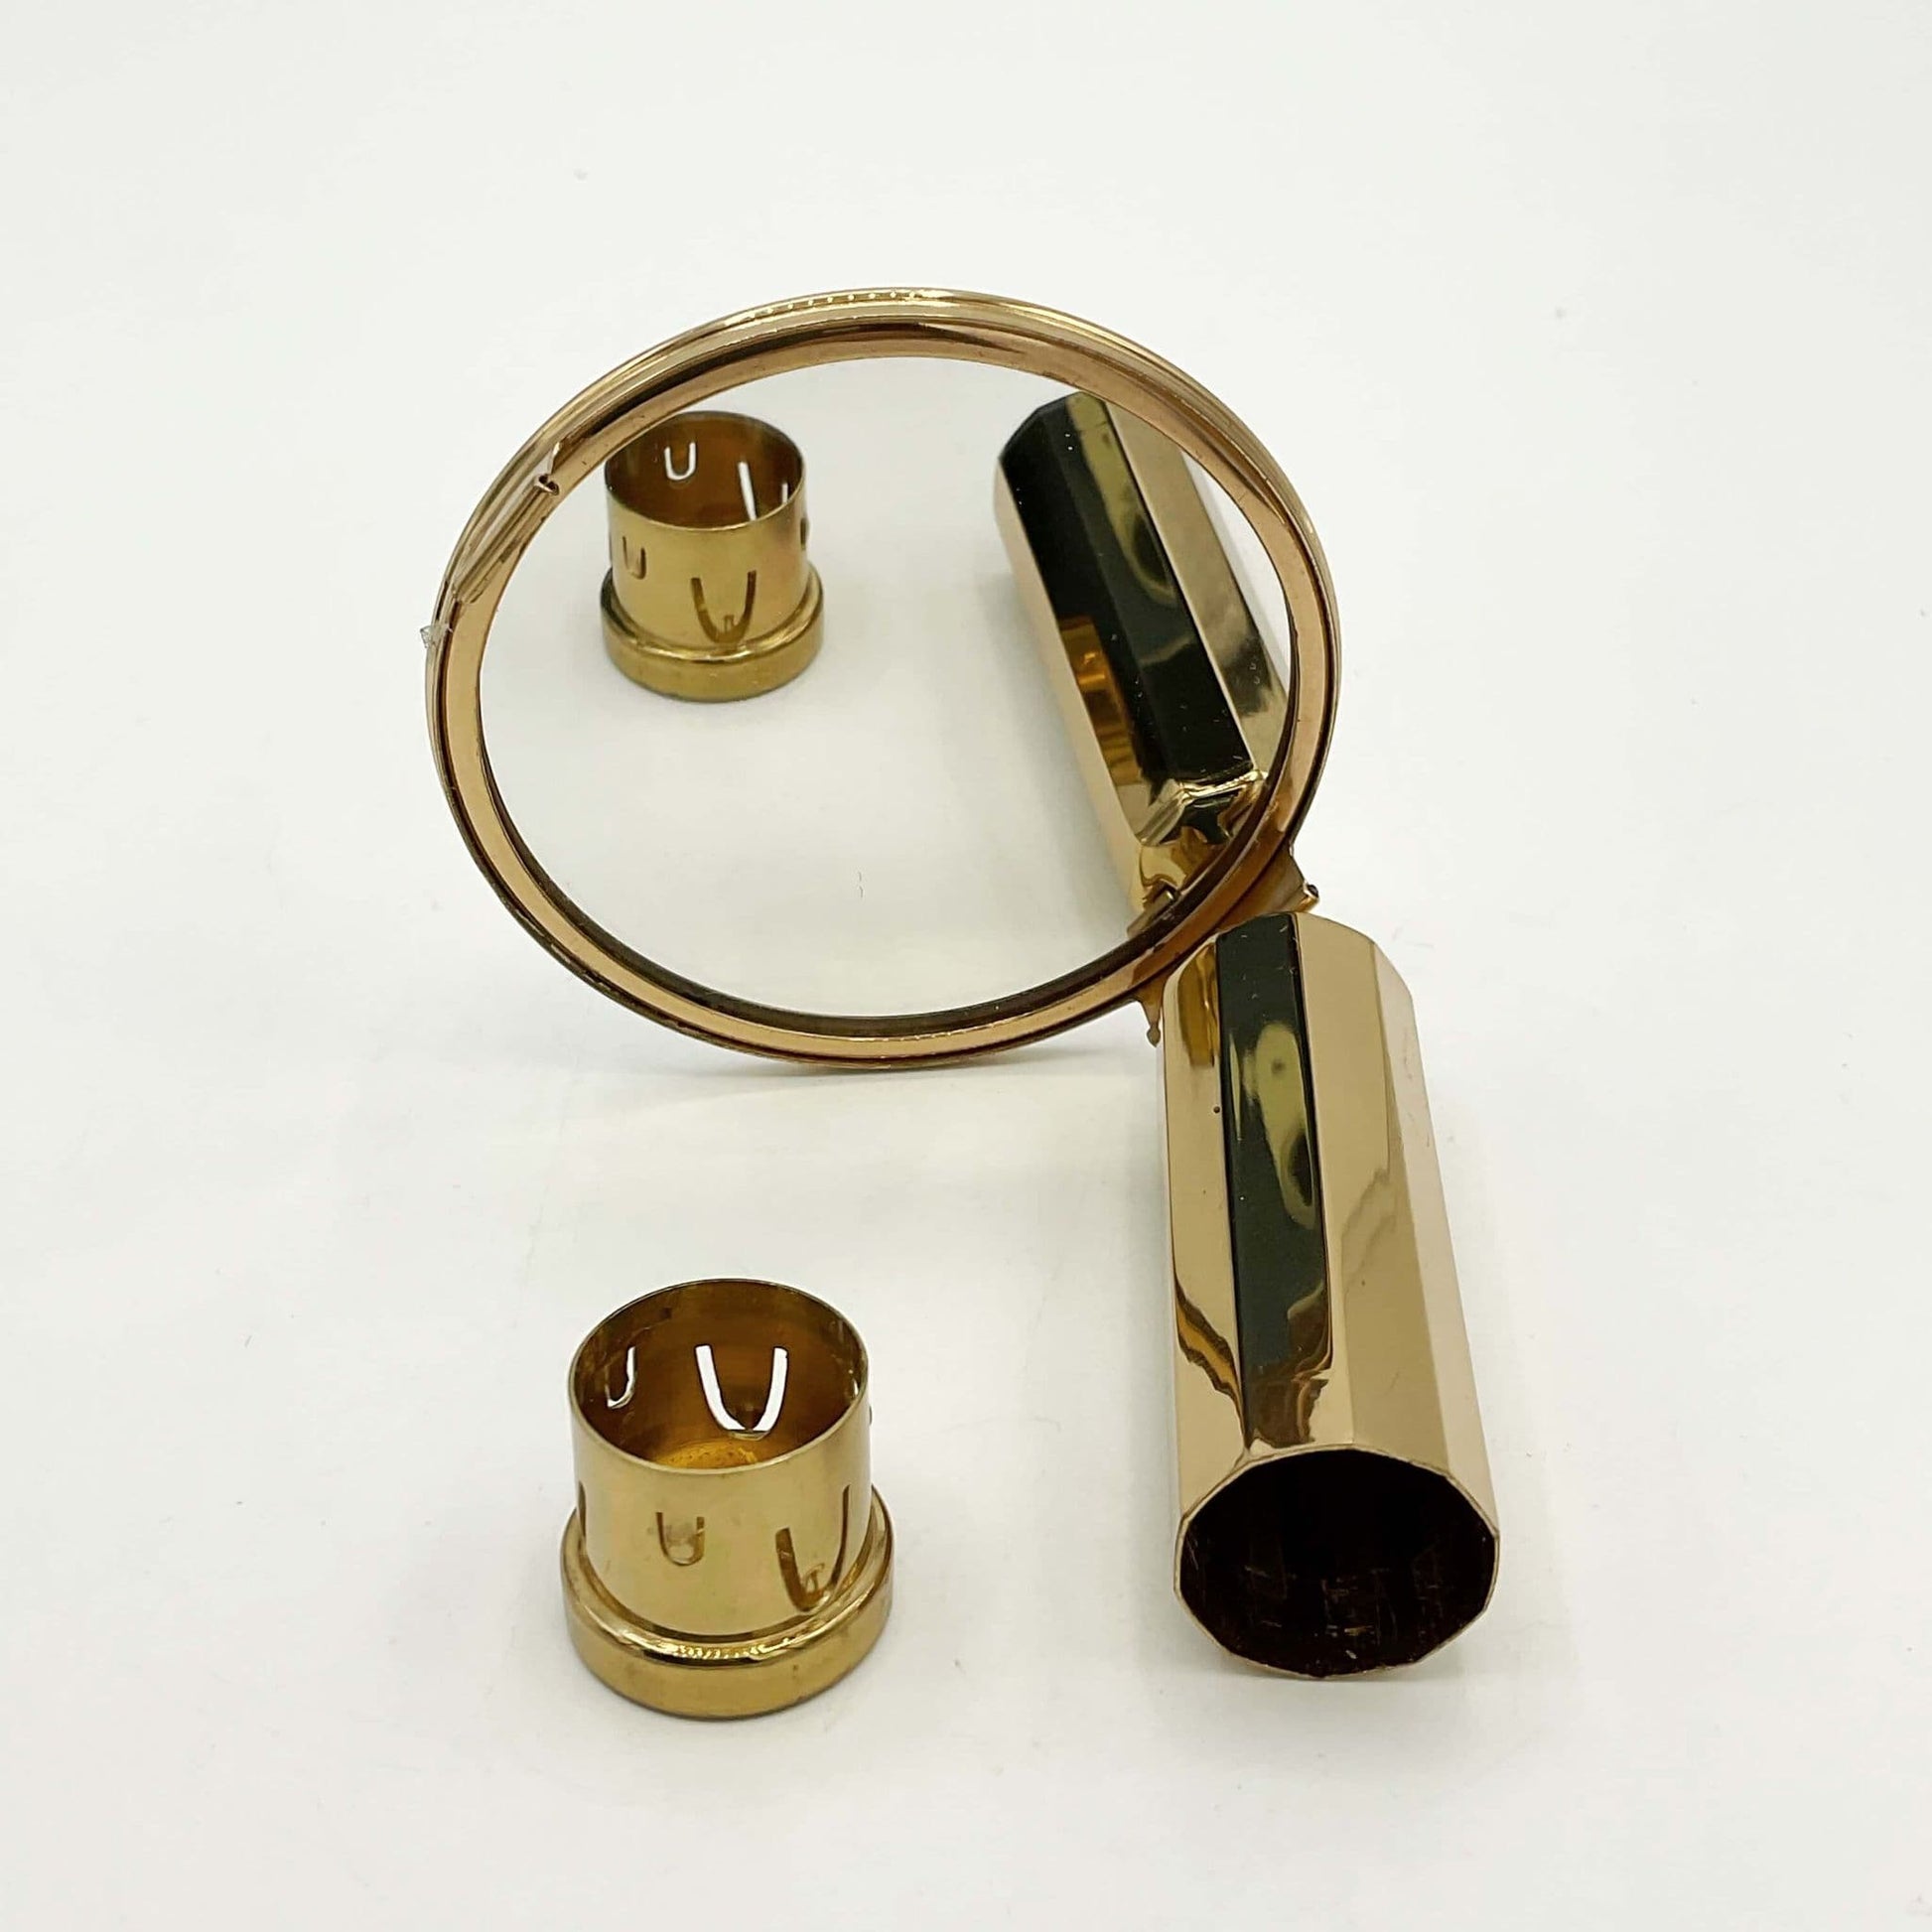 A gold coloured lipstick case with a mirror attached to the end. The mirror is showing a clear reflection and the end of the lipstick holder shows it is ready for a lipstick